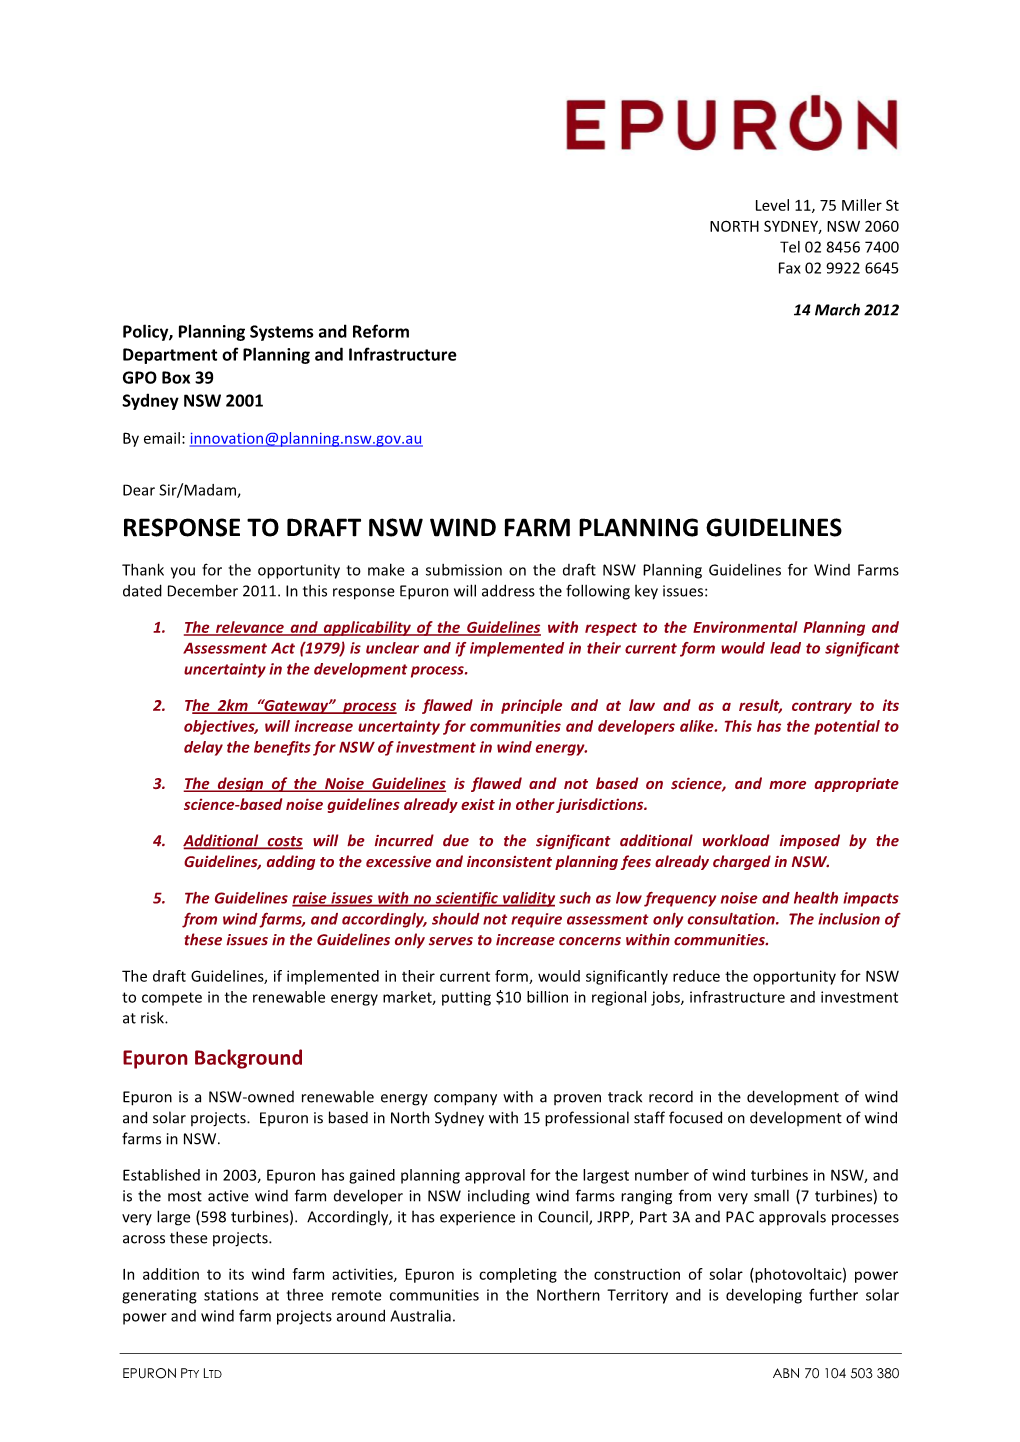 Response to Draft Nsw Wind Farm Planning Guidelines